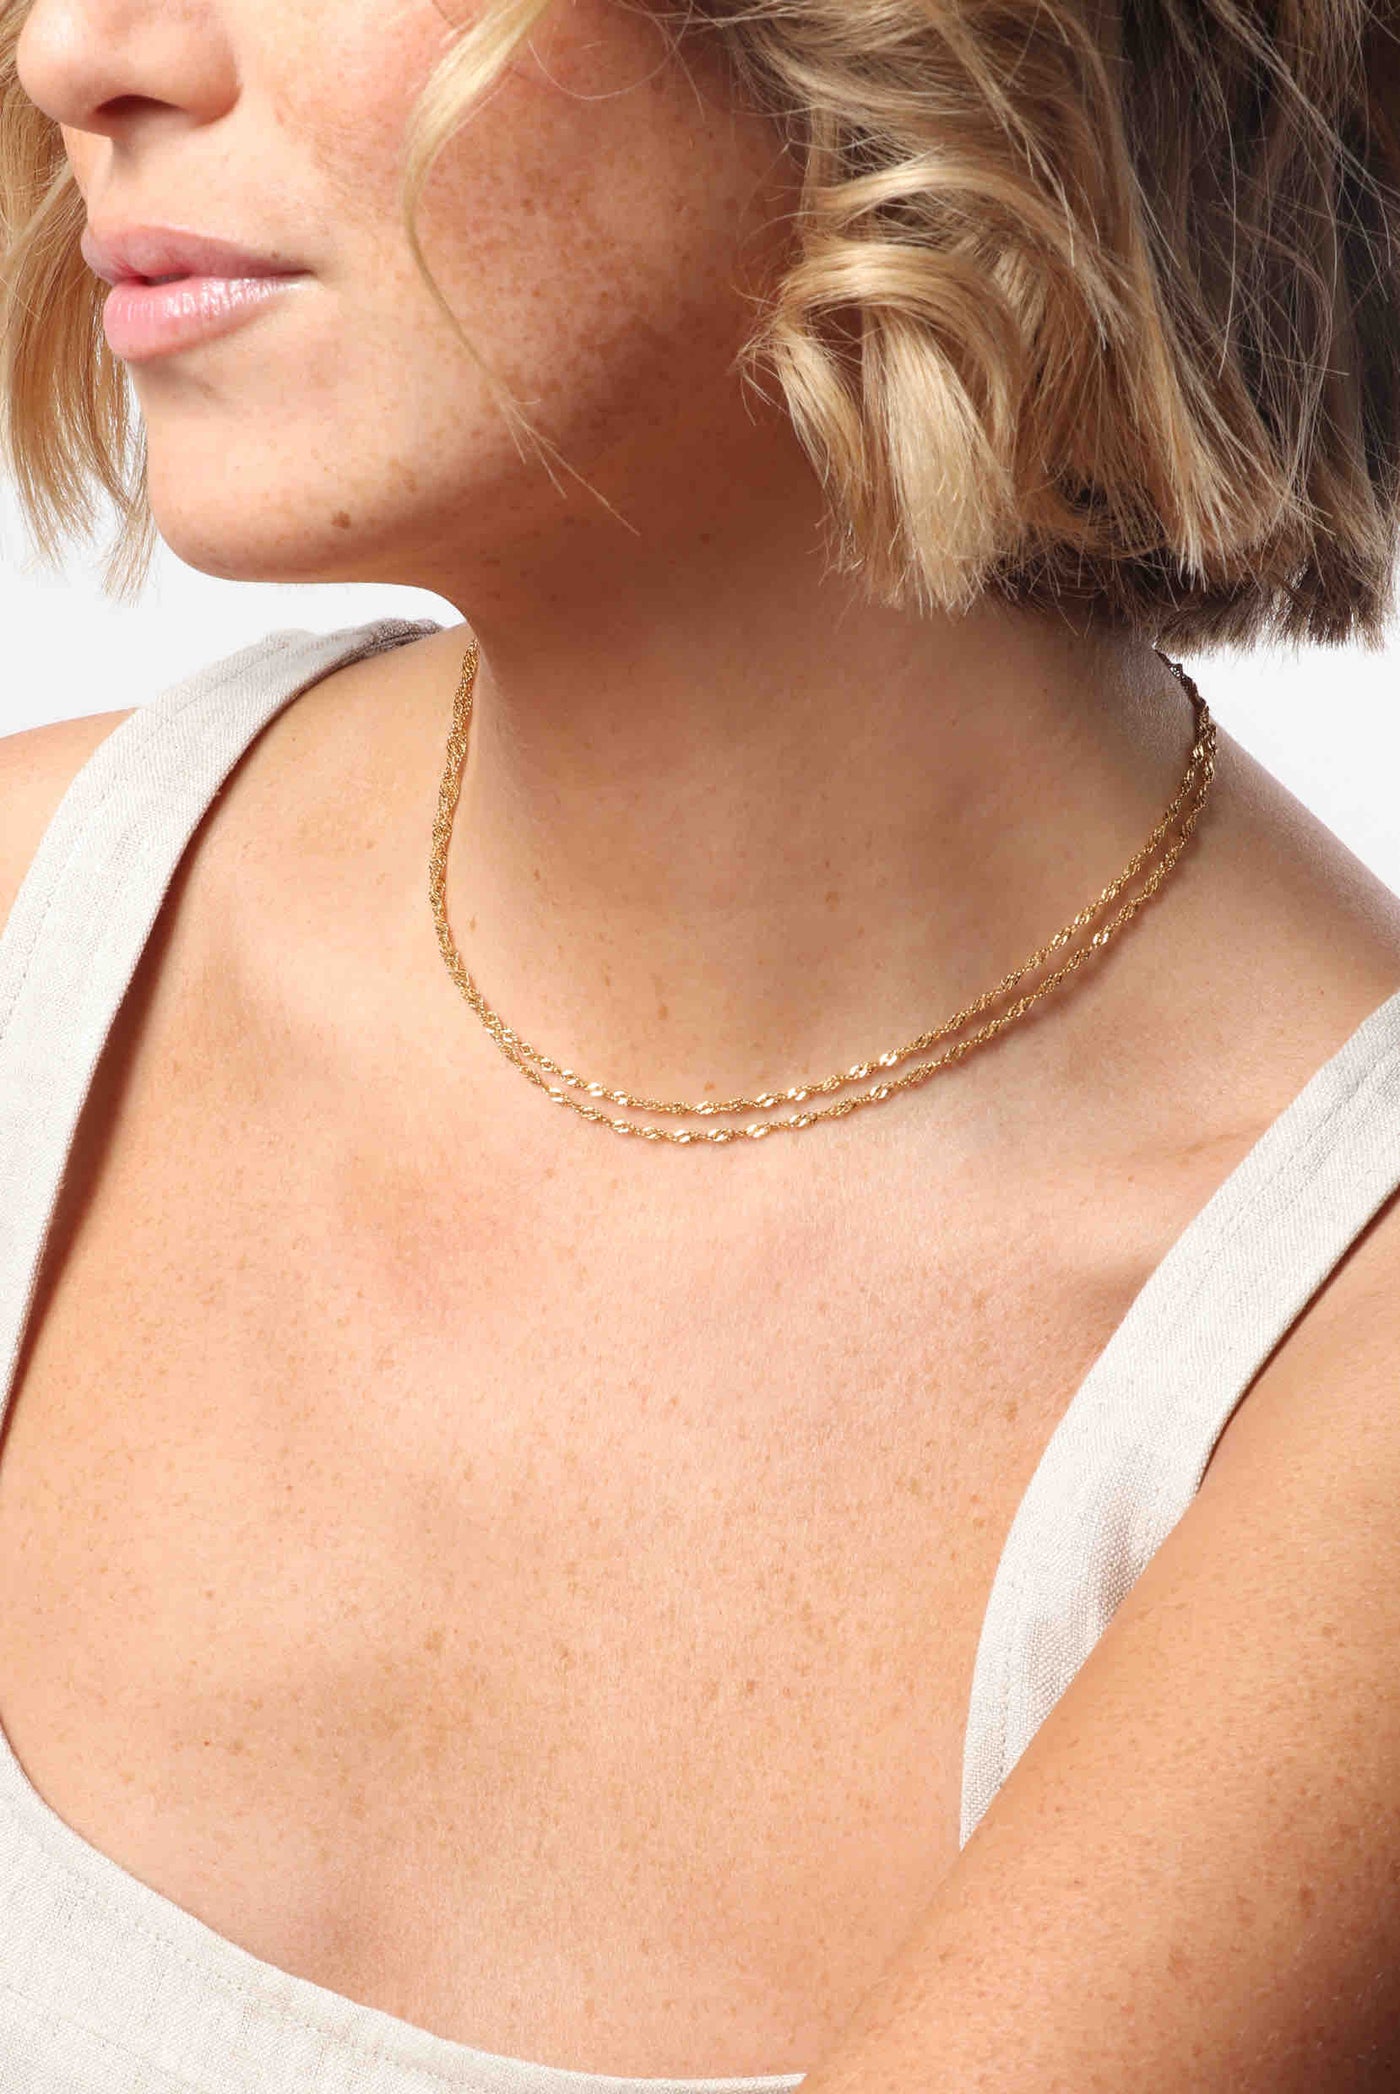 Marrin Costello wearing Marrin Costello Jewelry Helix Layers with thin dainty helix chains layered in a two in one necklace with lobster clasp closure and extender. Waterproof, sustainable, hypoallergenic. 14k gold plated stainless steel.